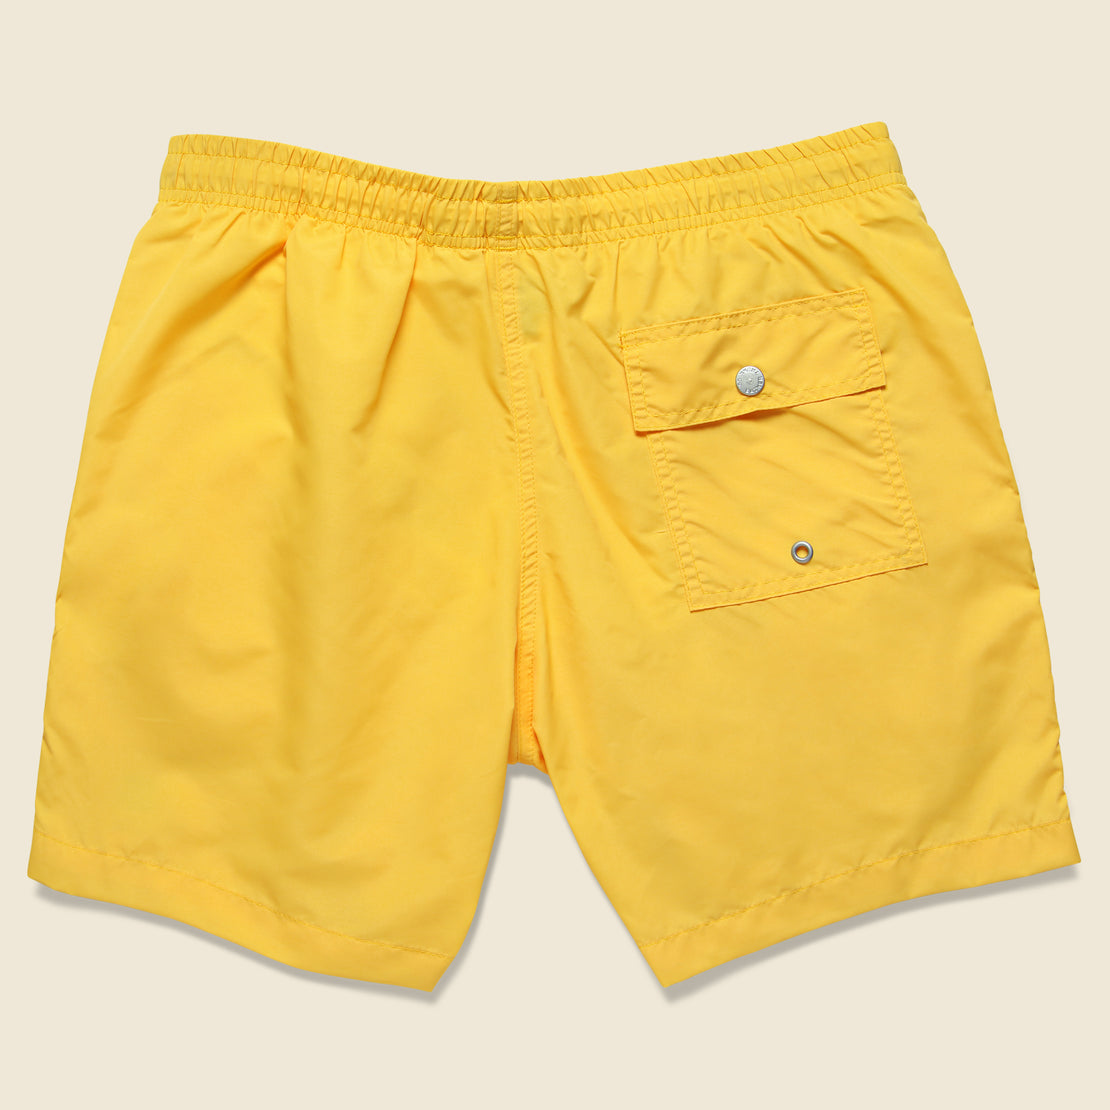 Bather - Solid Swim Trunk, SS19 - Bather Trunk Co. - STAG Provisions - Shorts - Swim